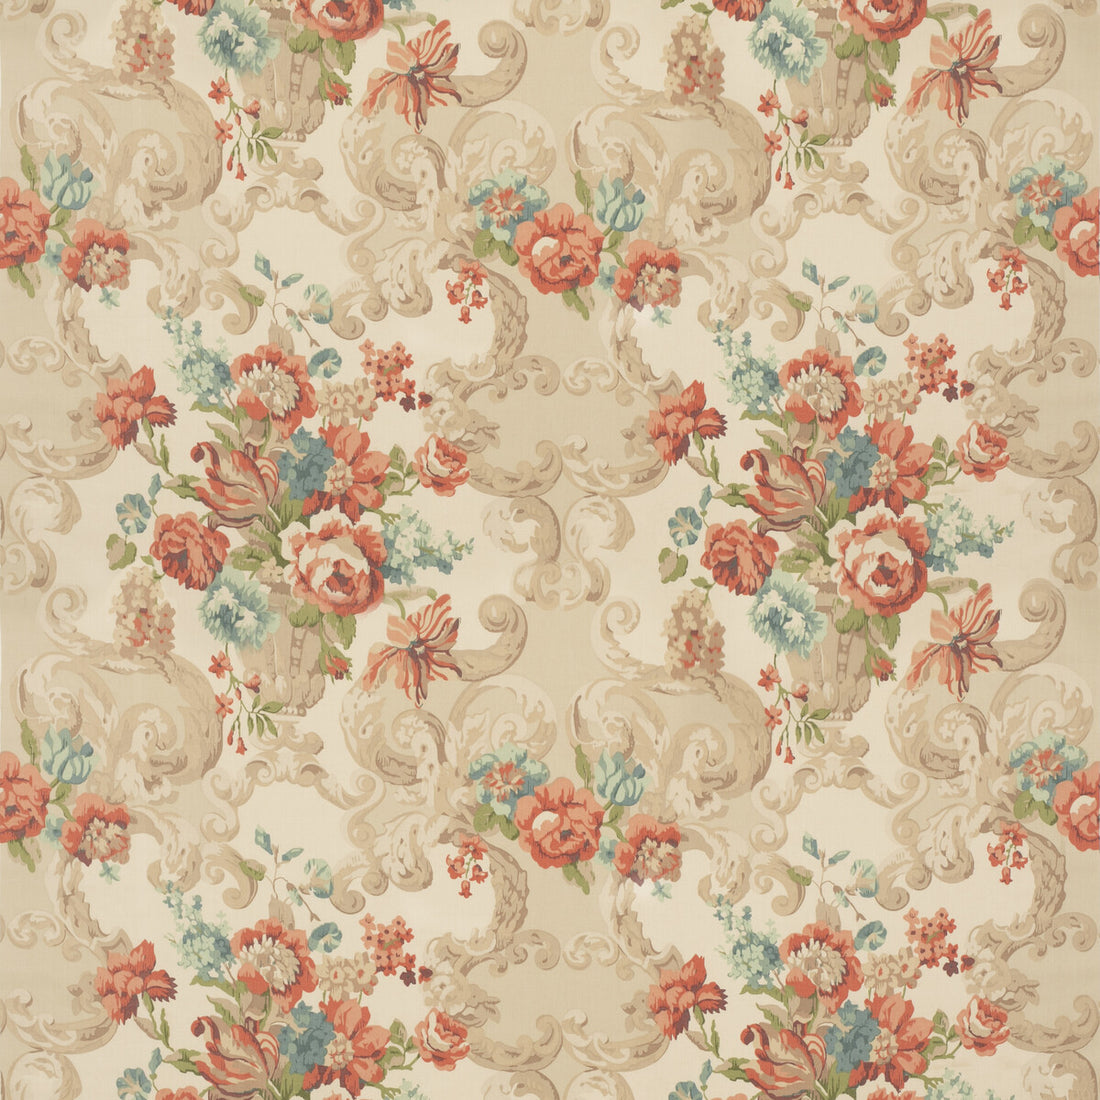 Floral Rococo fabric in red/green color - pattern FD2011.V117.0 - by Mulberry in the Icons Fabrics collection